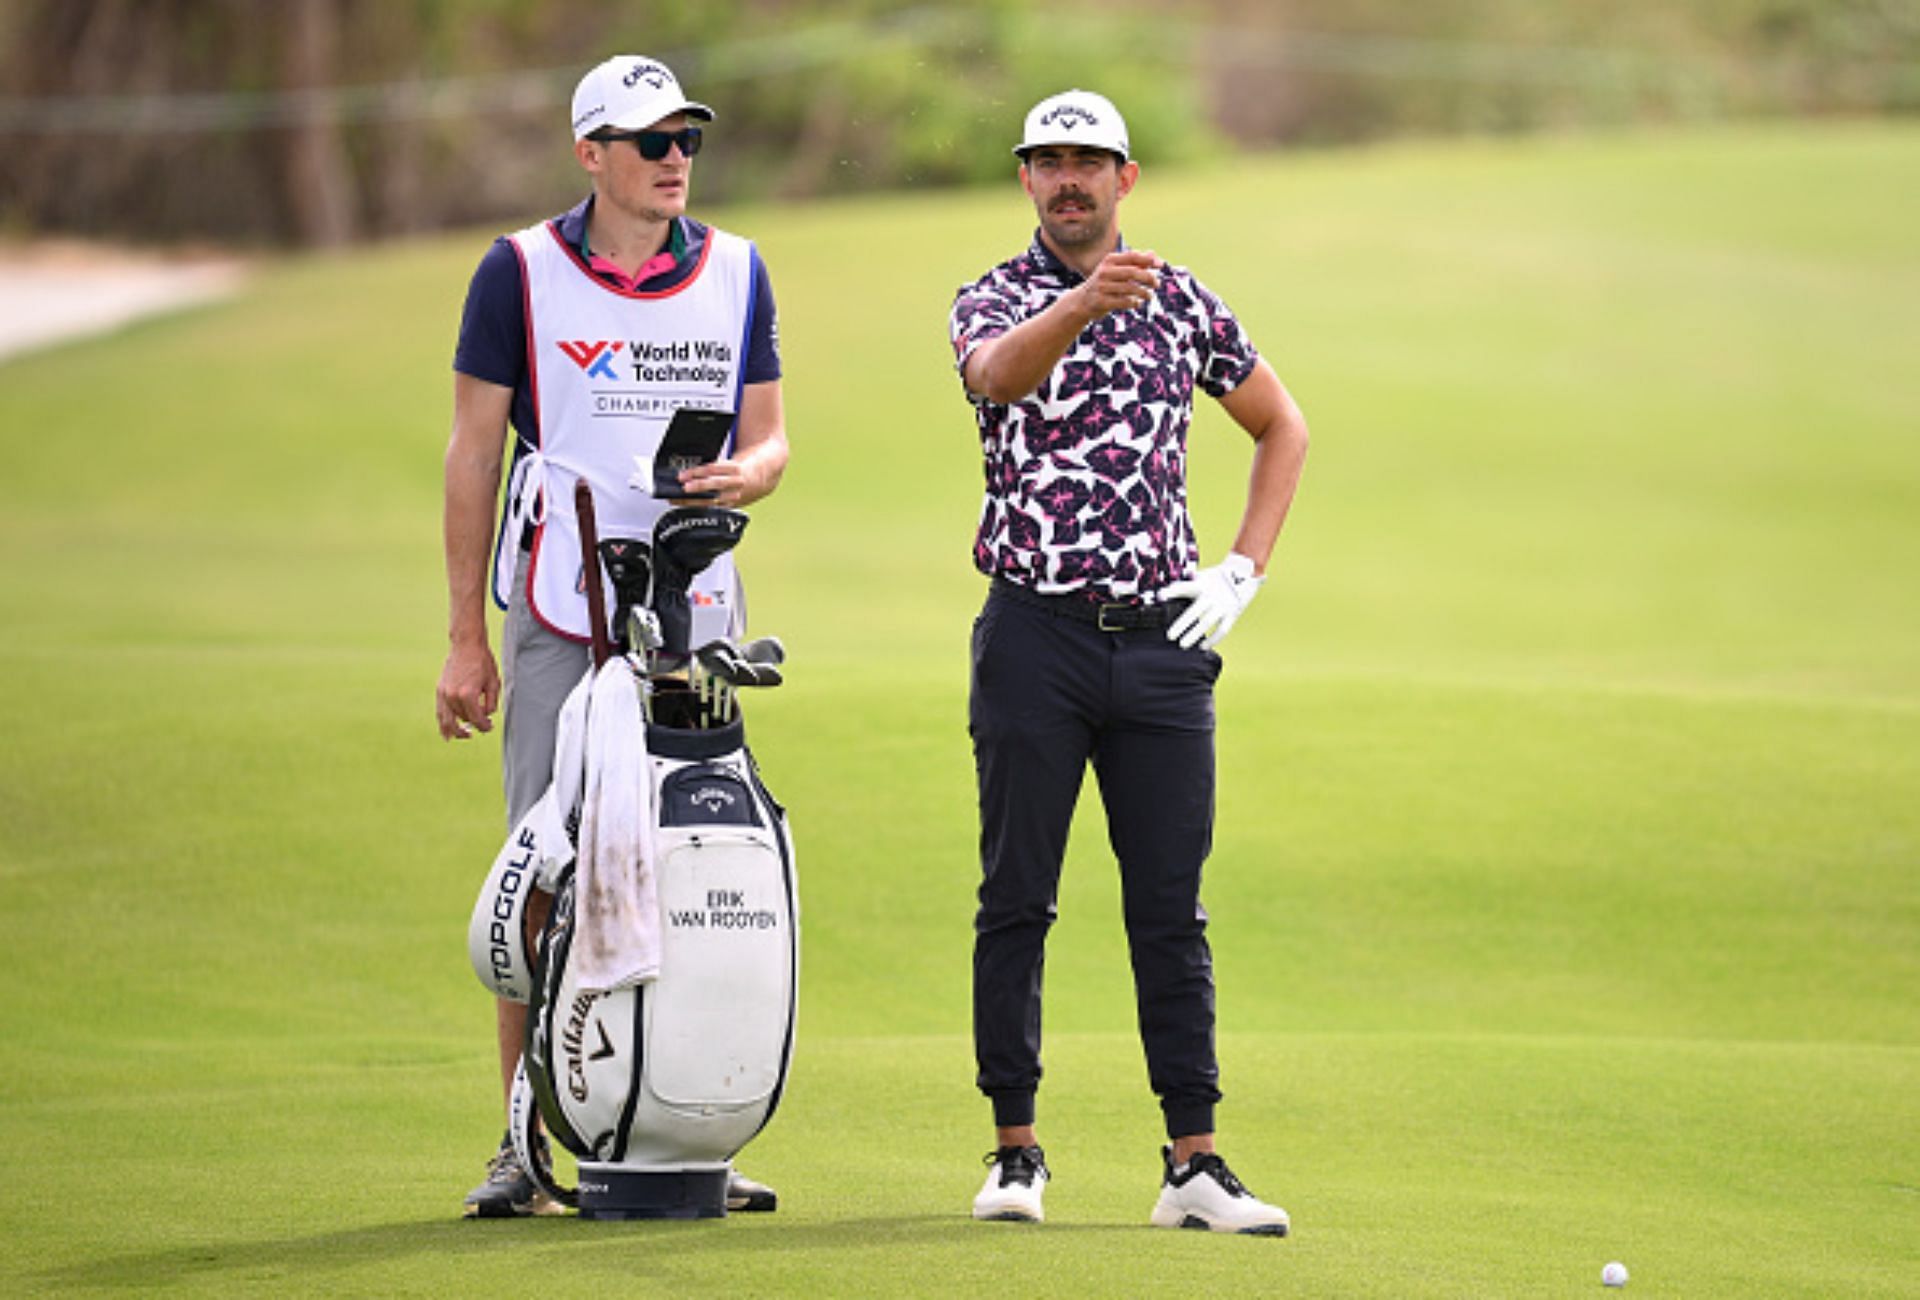 Alex Gaugert, caddying for Erick Van Rooyen at the 2023 World Wide Technology Championship (Image via Getty).